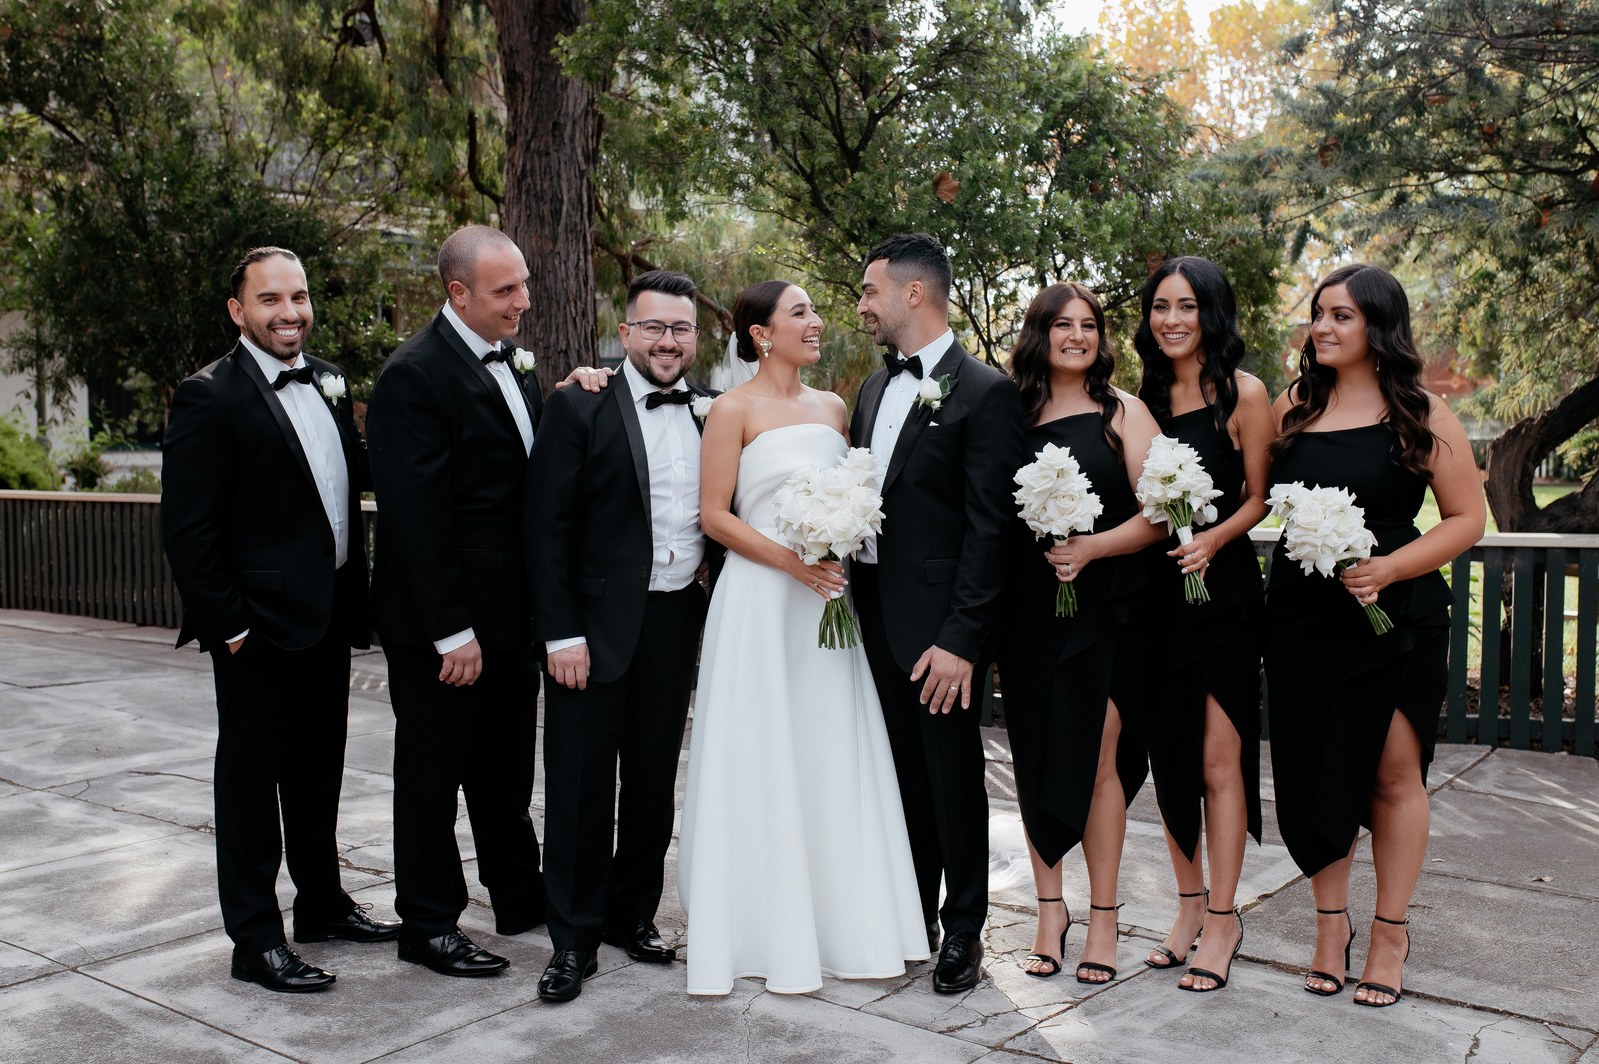  3 groomsmen and 3 bridesmaids, all wearing black, stood alongside a male and female partner. The male is in a black suit, while the woman is in an all-white wedding dress. The bridesmaids and bride are holding white flower bouquets.